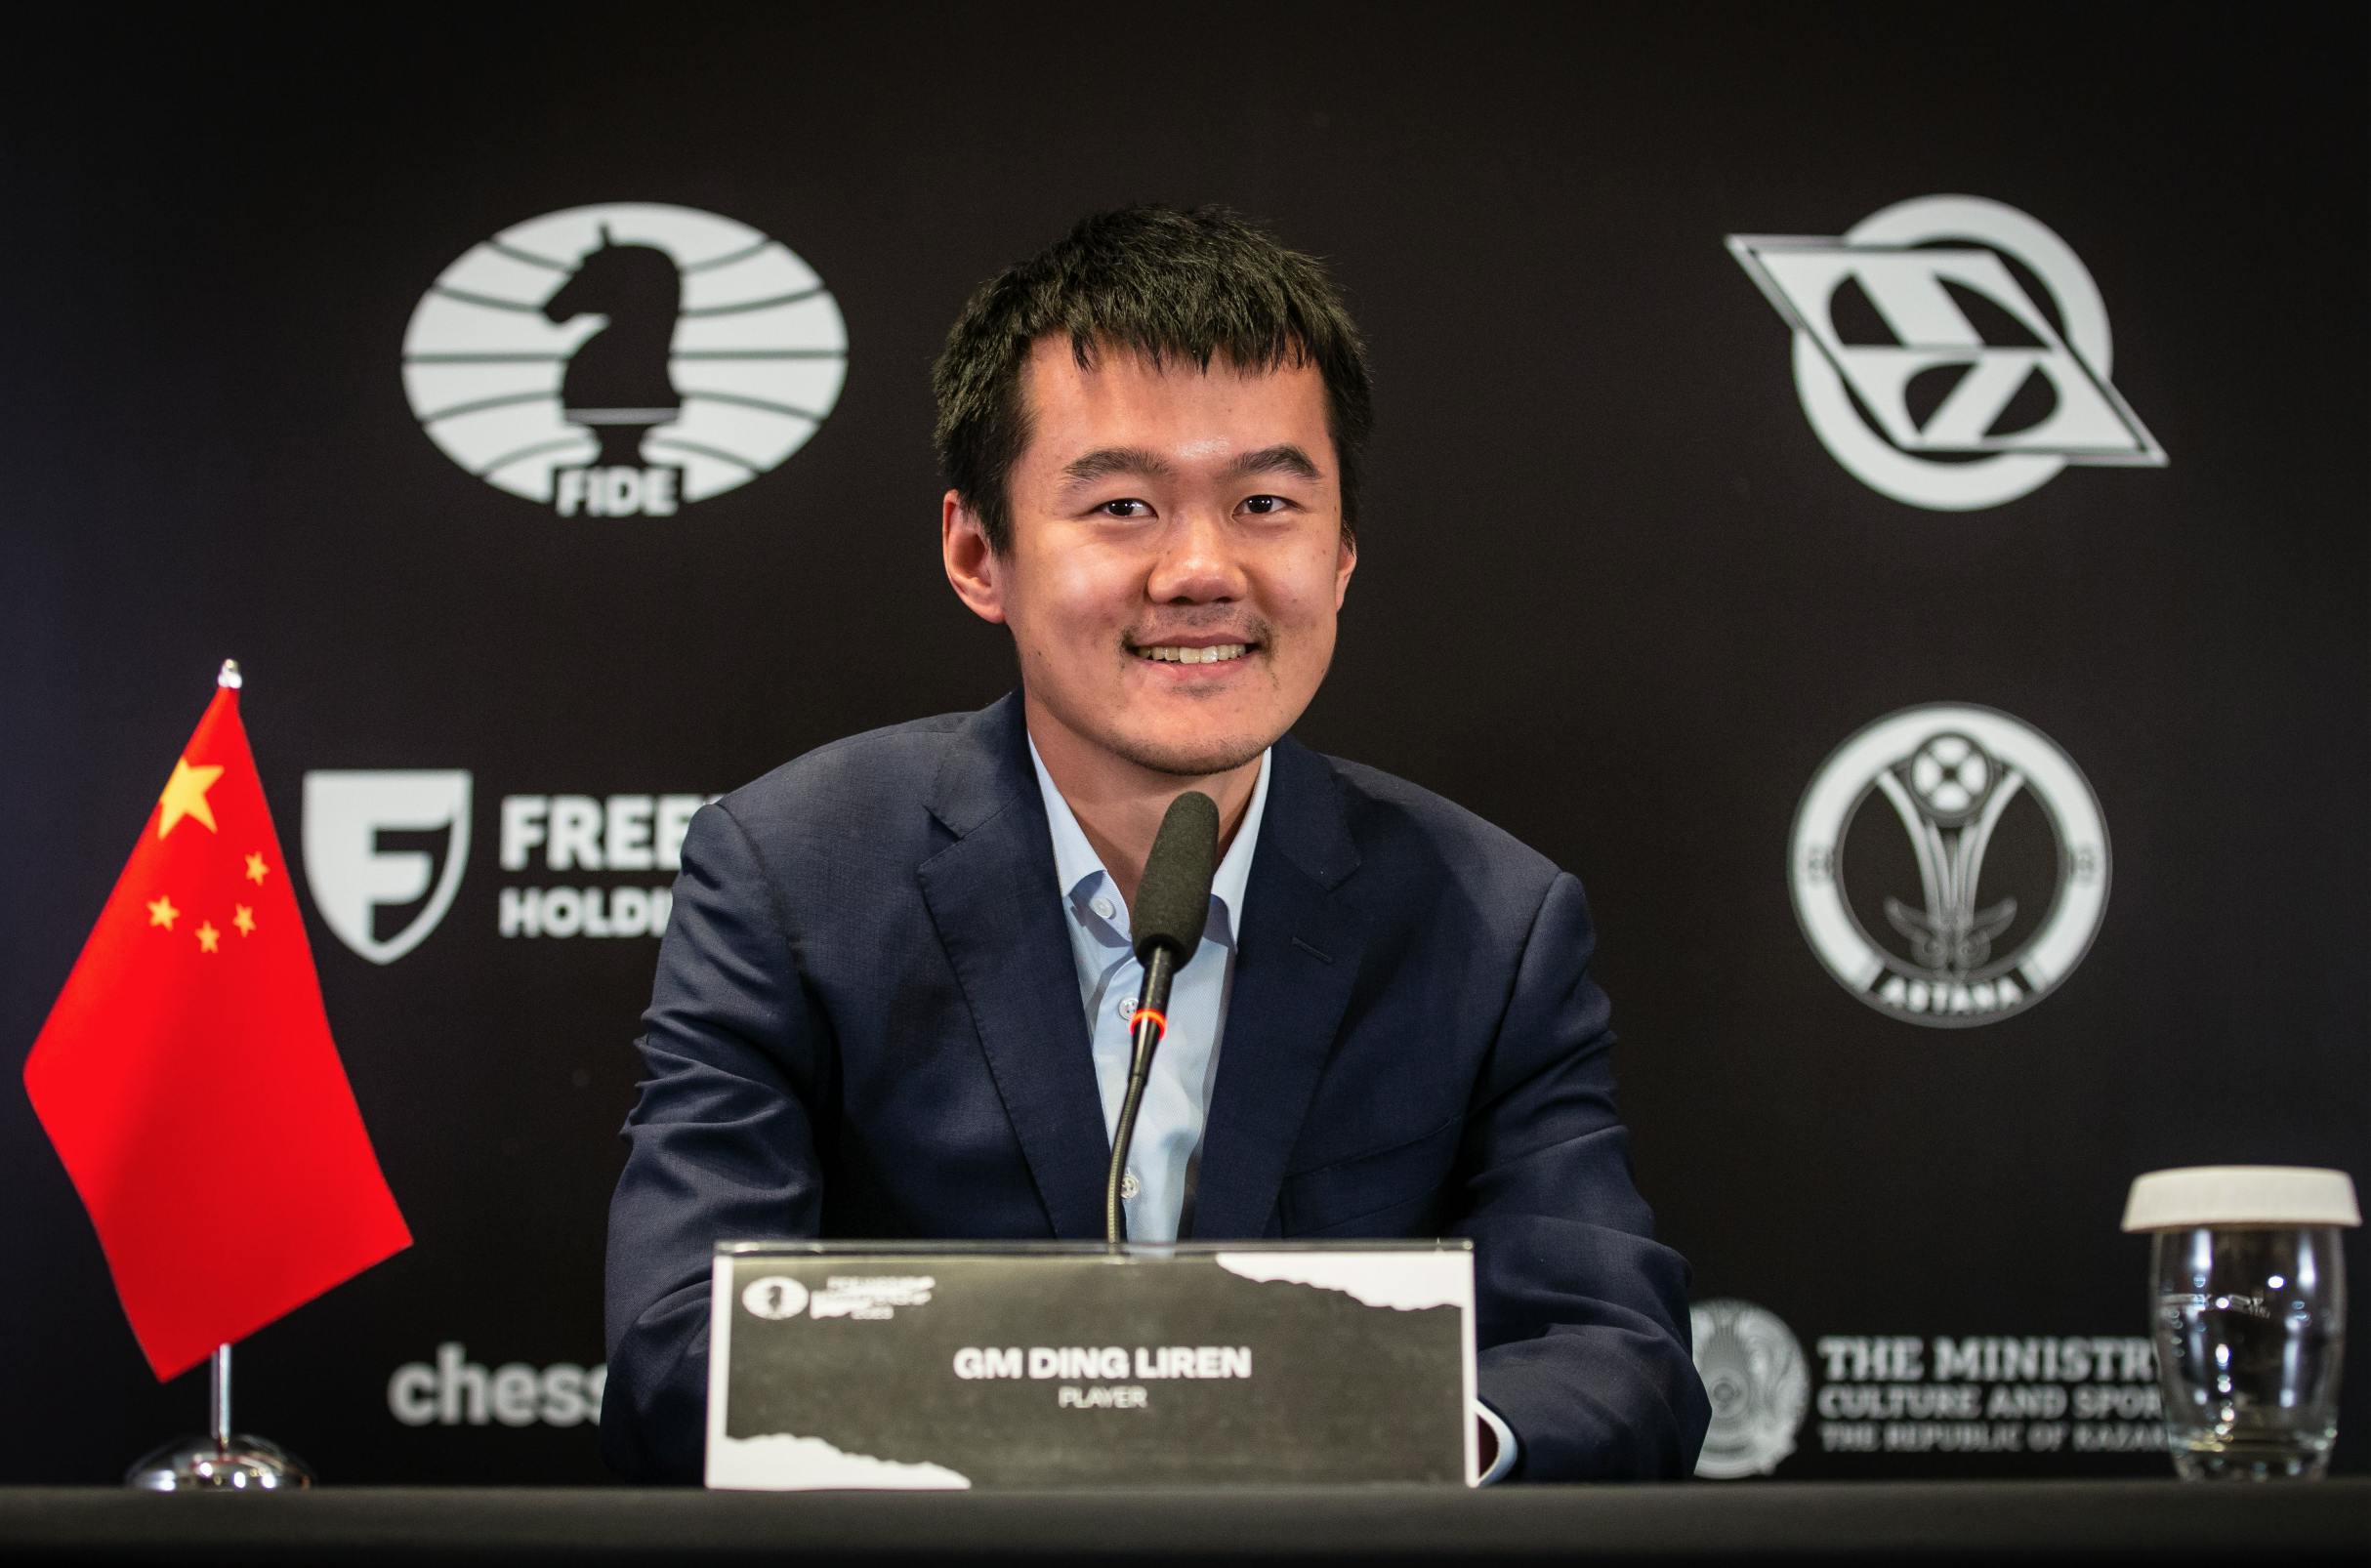 World Chess Championship 2023 Game 9 As It Happened: Ian Nepomniachtchi,  Ding Liren play out 82-move draw in nearly 6 hours